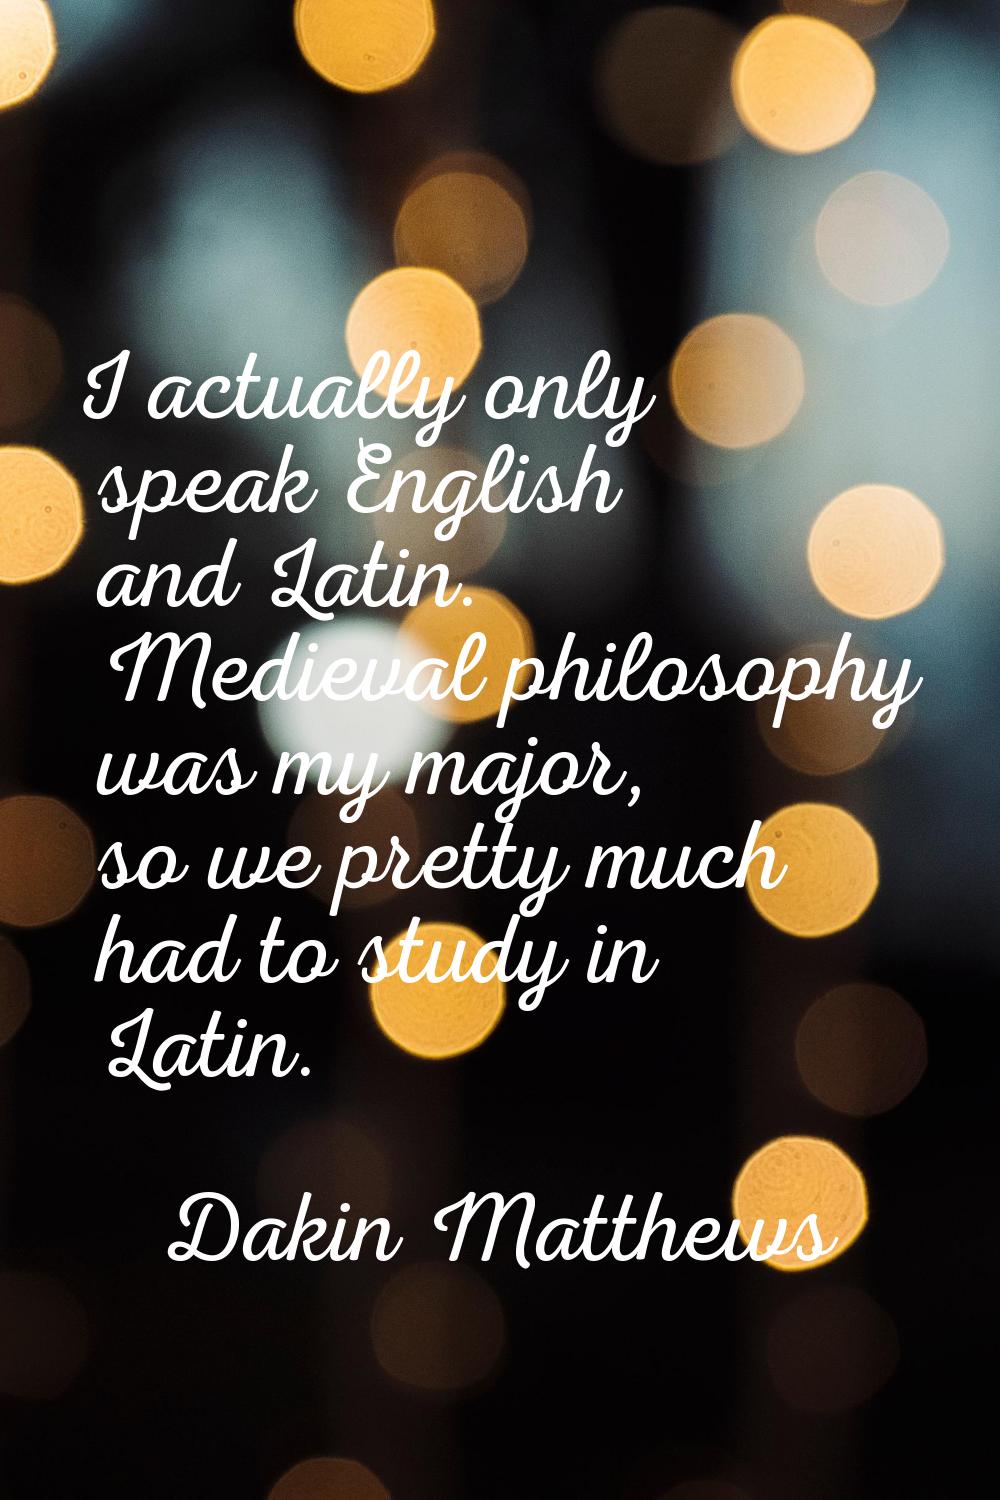 I actually only speak English and Latin. Medieval philosophy was my major, so we pretty much had to